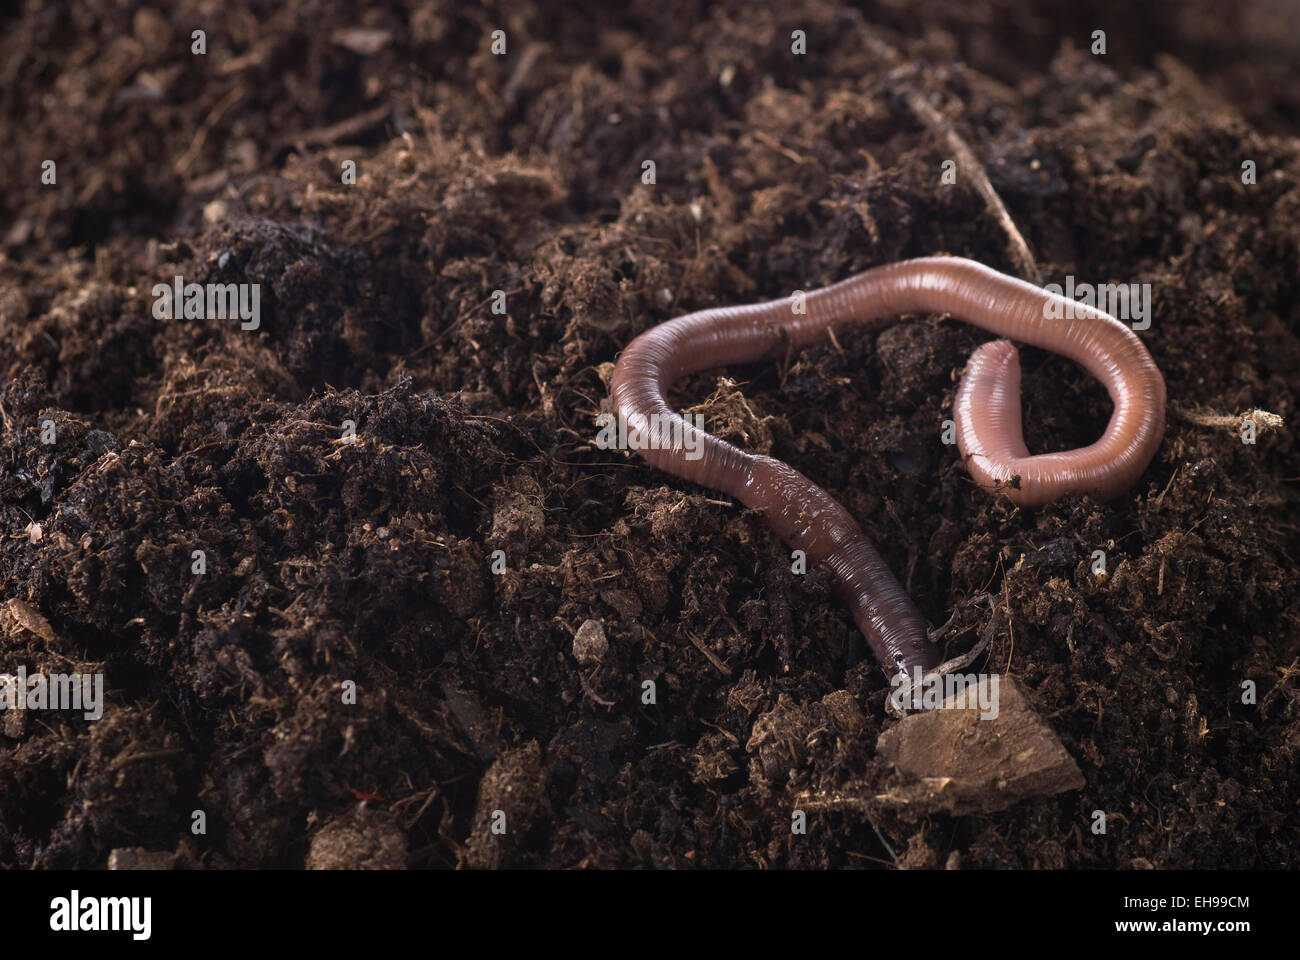 Earthworm in soil close up. Stock Photo